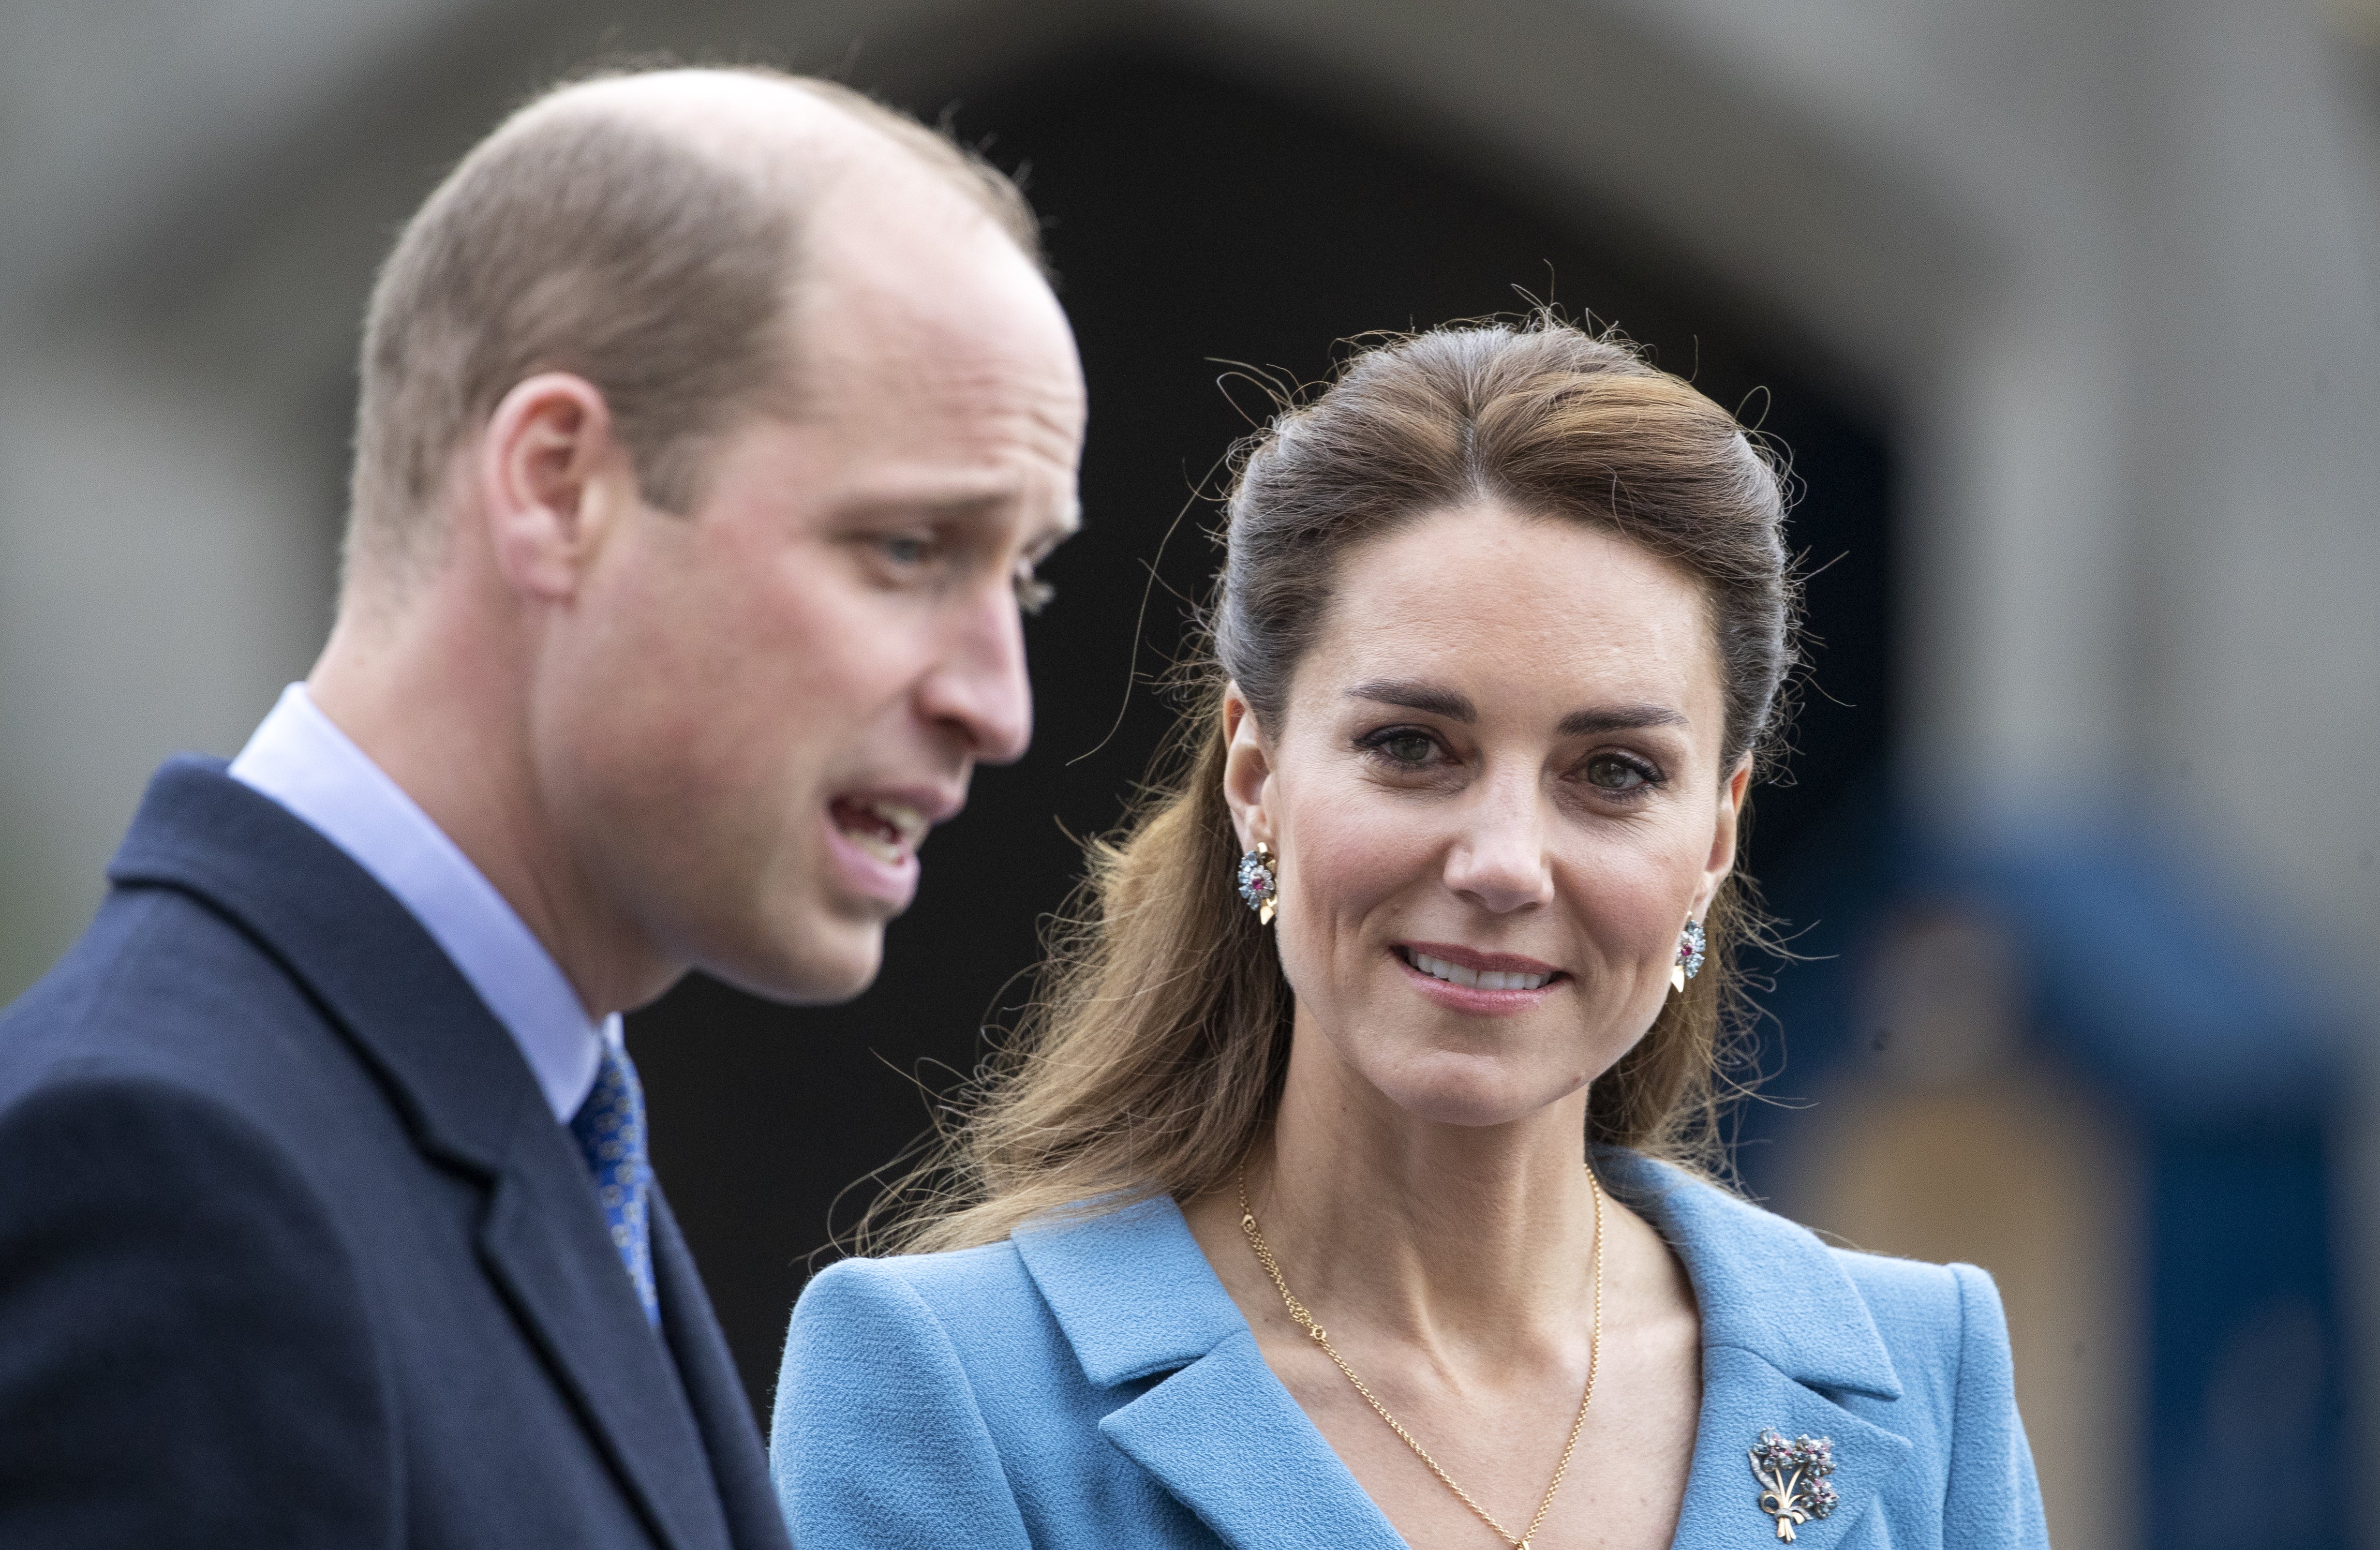 The Duke and Duchess of Cambridge will spend two days in Scotland (PA)